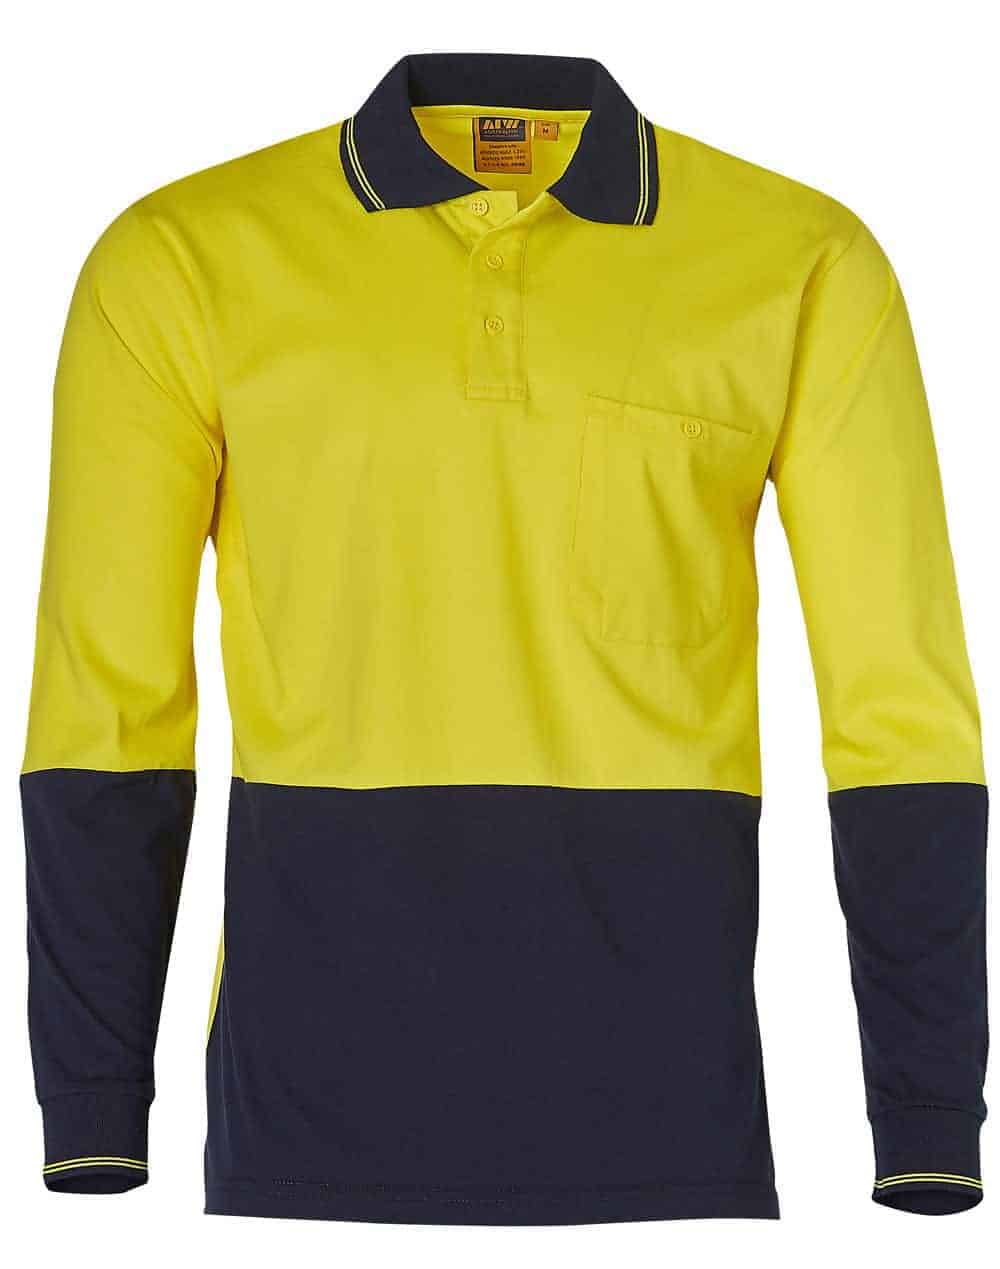 Cotton Jersey two tone Long Sleeve Safety Polo 6HPS - Eclipse Universal